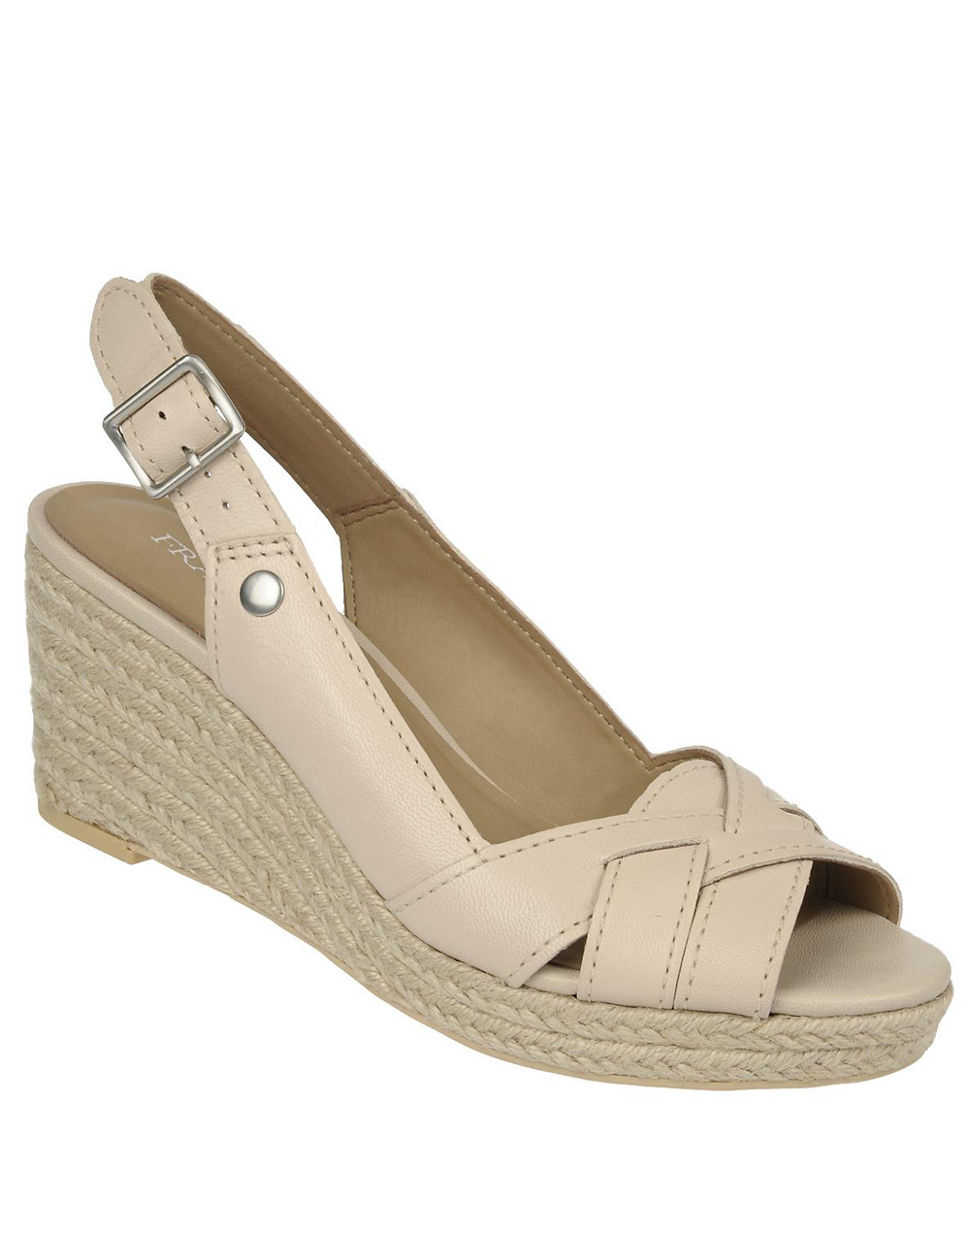 Franco sarto Leather Slingback Espadrille Wedge Sandals in Natural | Lyst